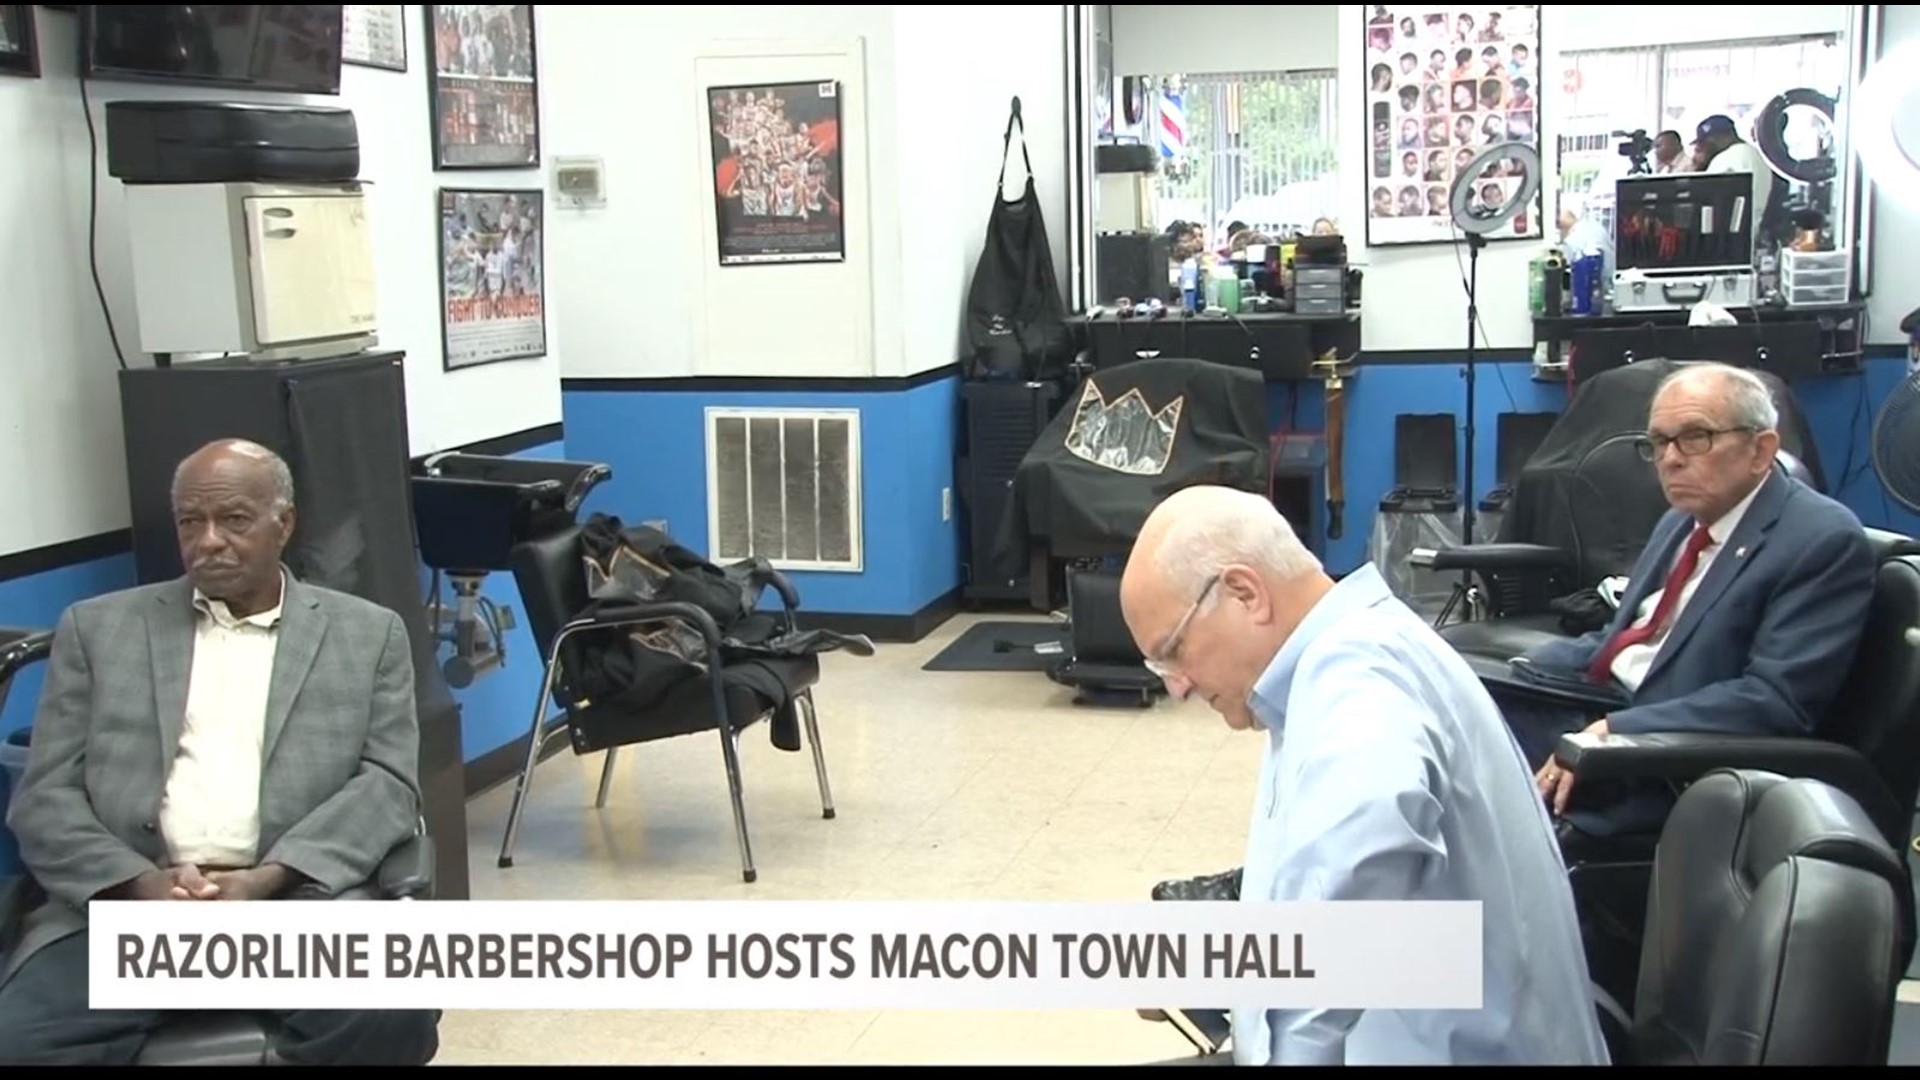 Razorline Barbershop held a town hall Monday night to discuss issues like blight and gun violence.